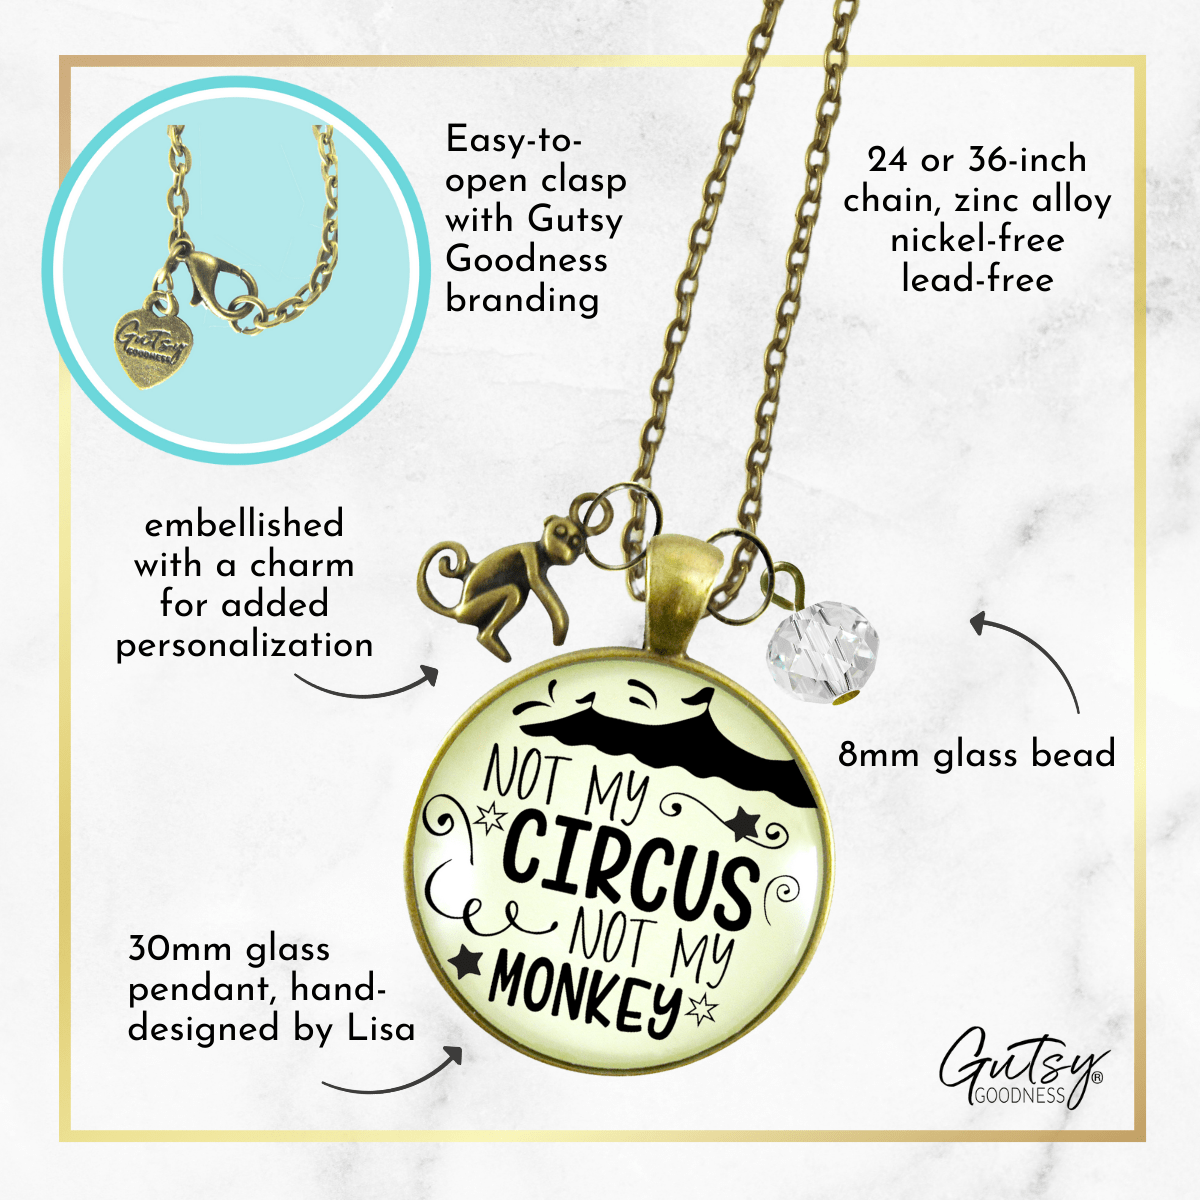 Gutsy Goodness Not My Circus Monkey Necklace Funny Attitude Novelty Jewelry Quote - Gutsy Goodness Handmade Jewelry;Not My Circus Monkey Necklace Funny Attitude Novelty Jewelry Quote - Gutsy Goodness Handmade Jewelry Gifts